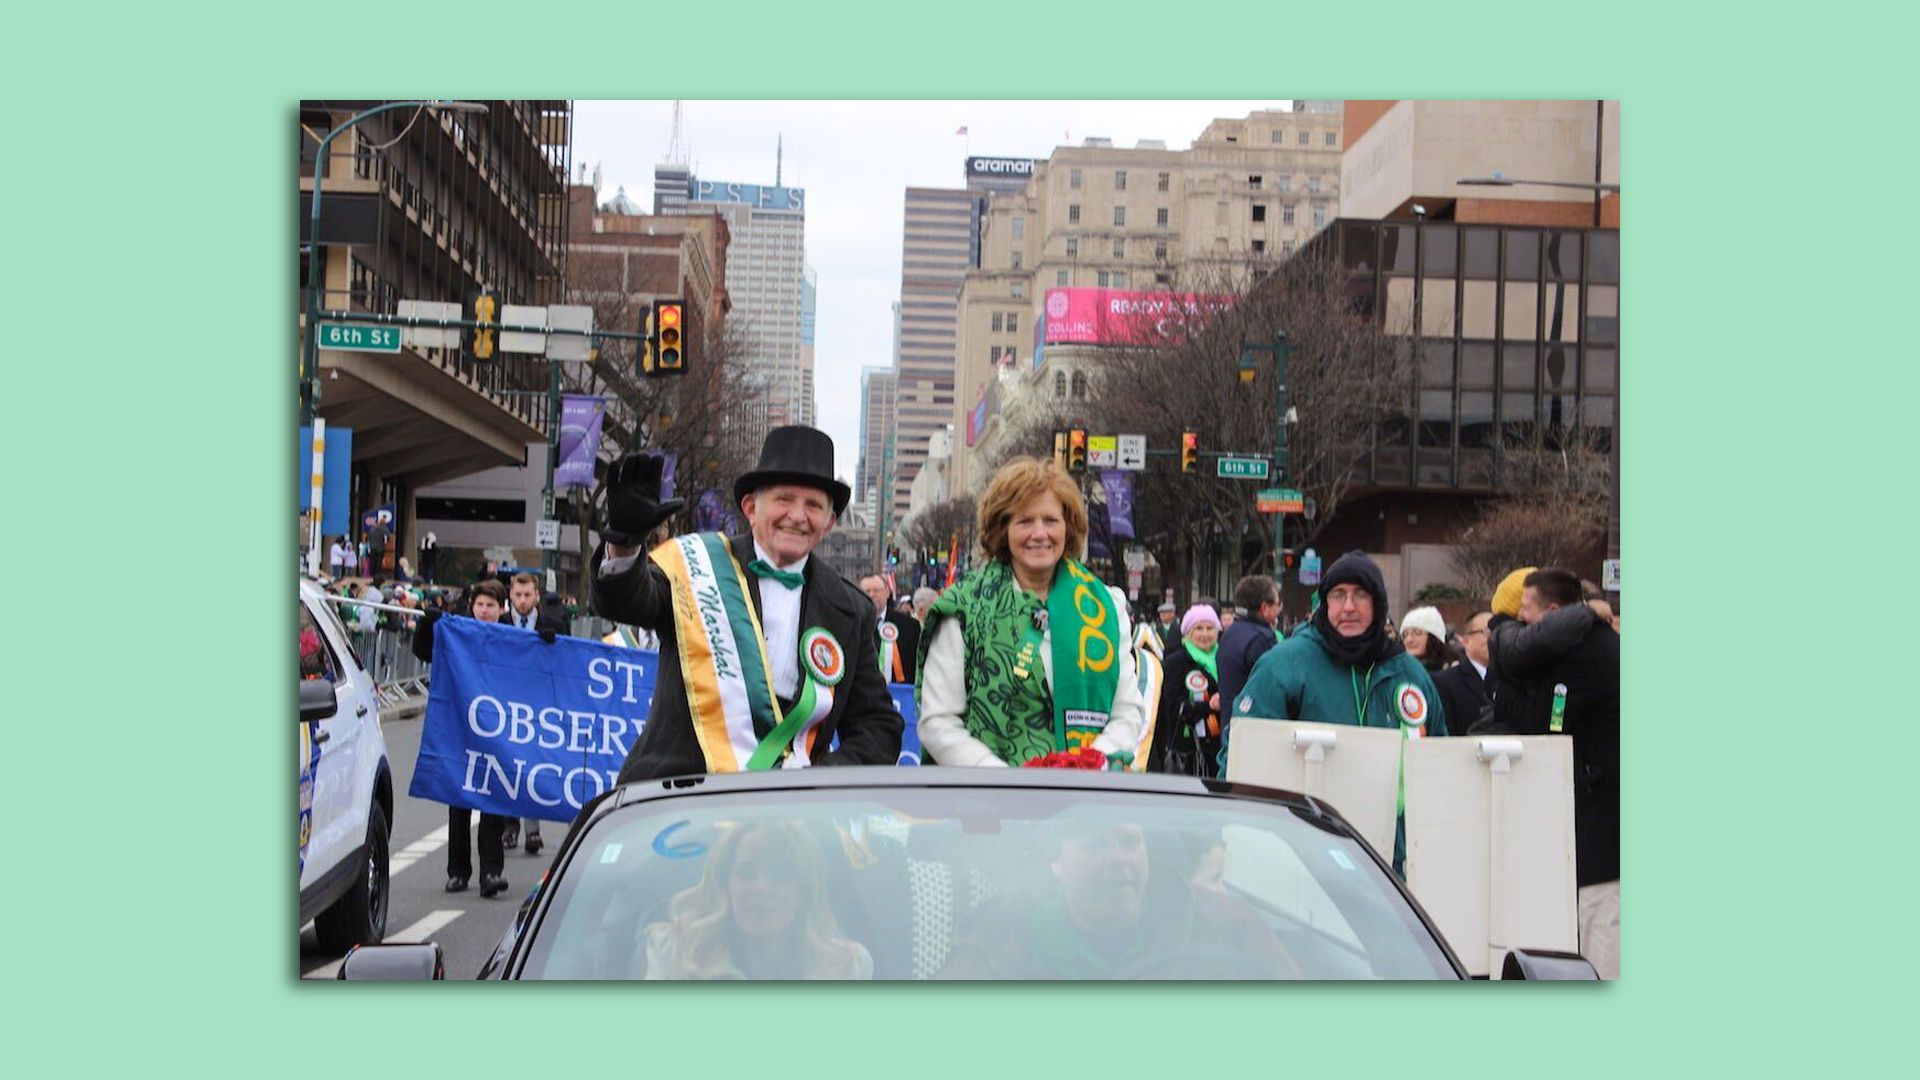 Caption: St. Patrick's Day Parade Grand Marshal Barney Boyce (left) and wife Carmel Boyce during the 2017 parade